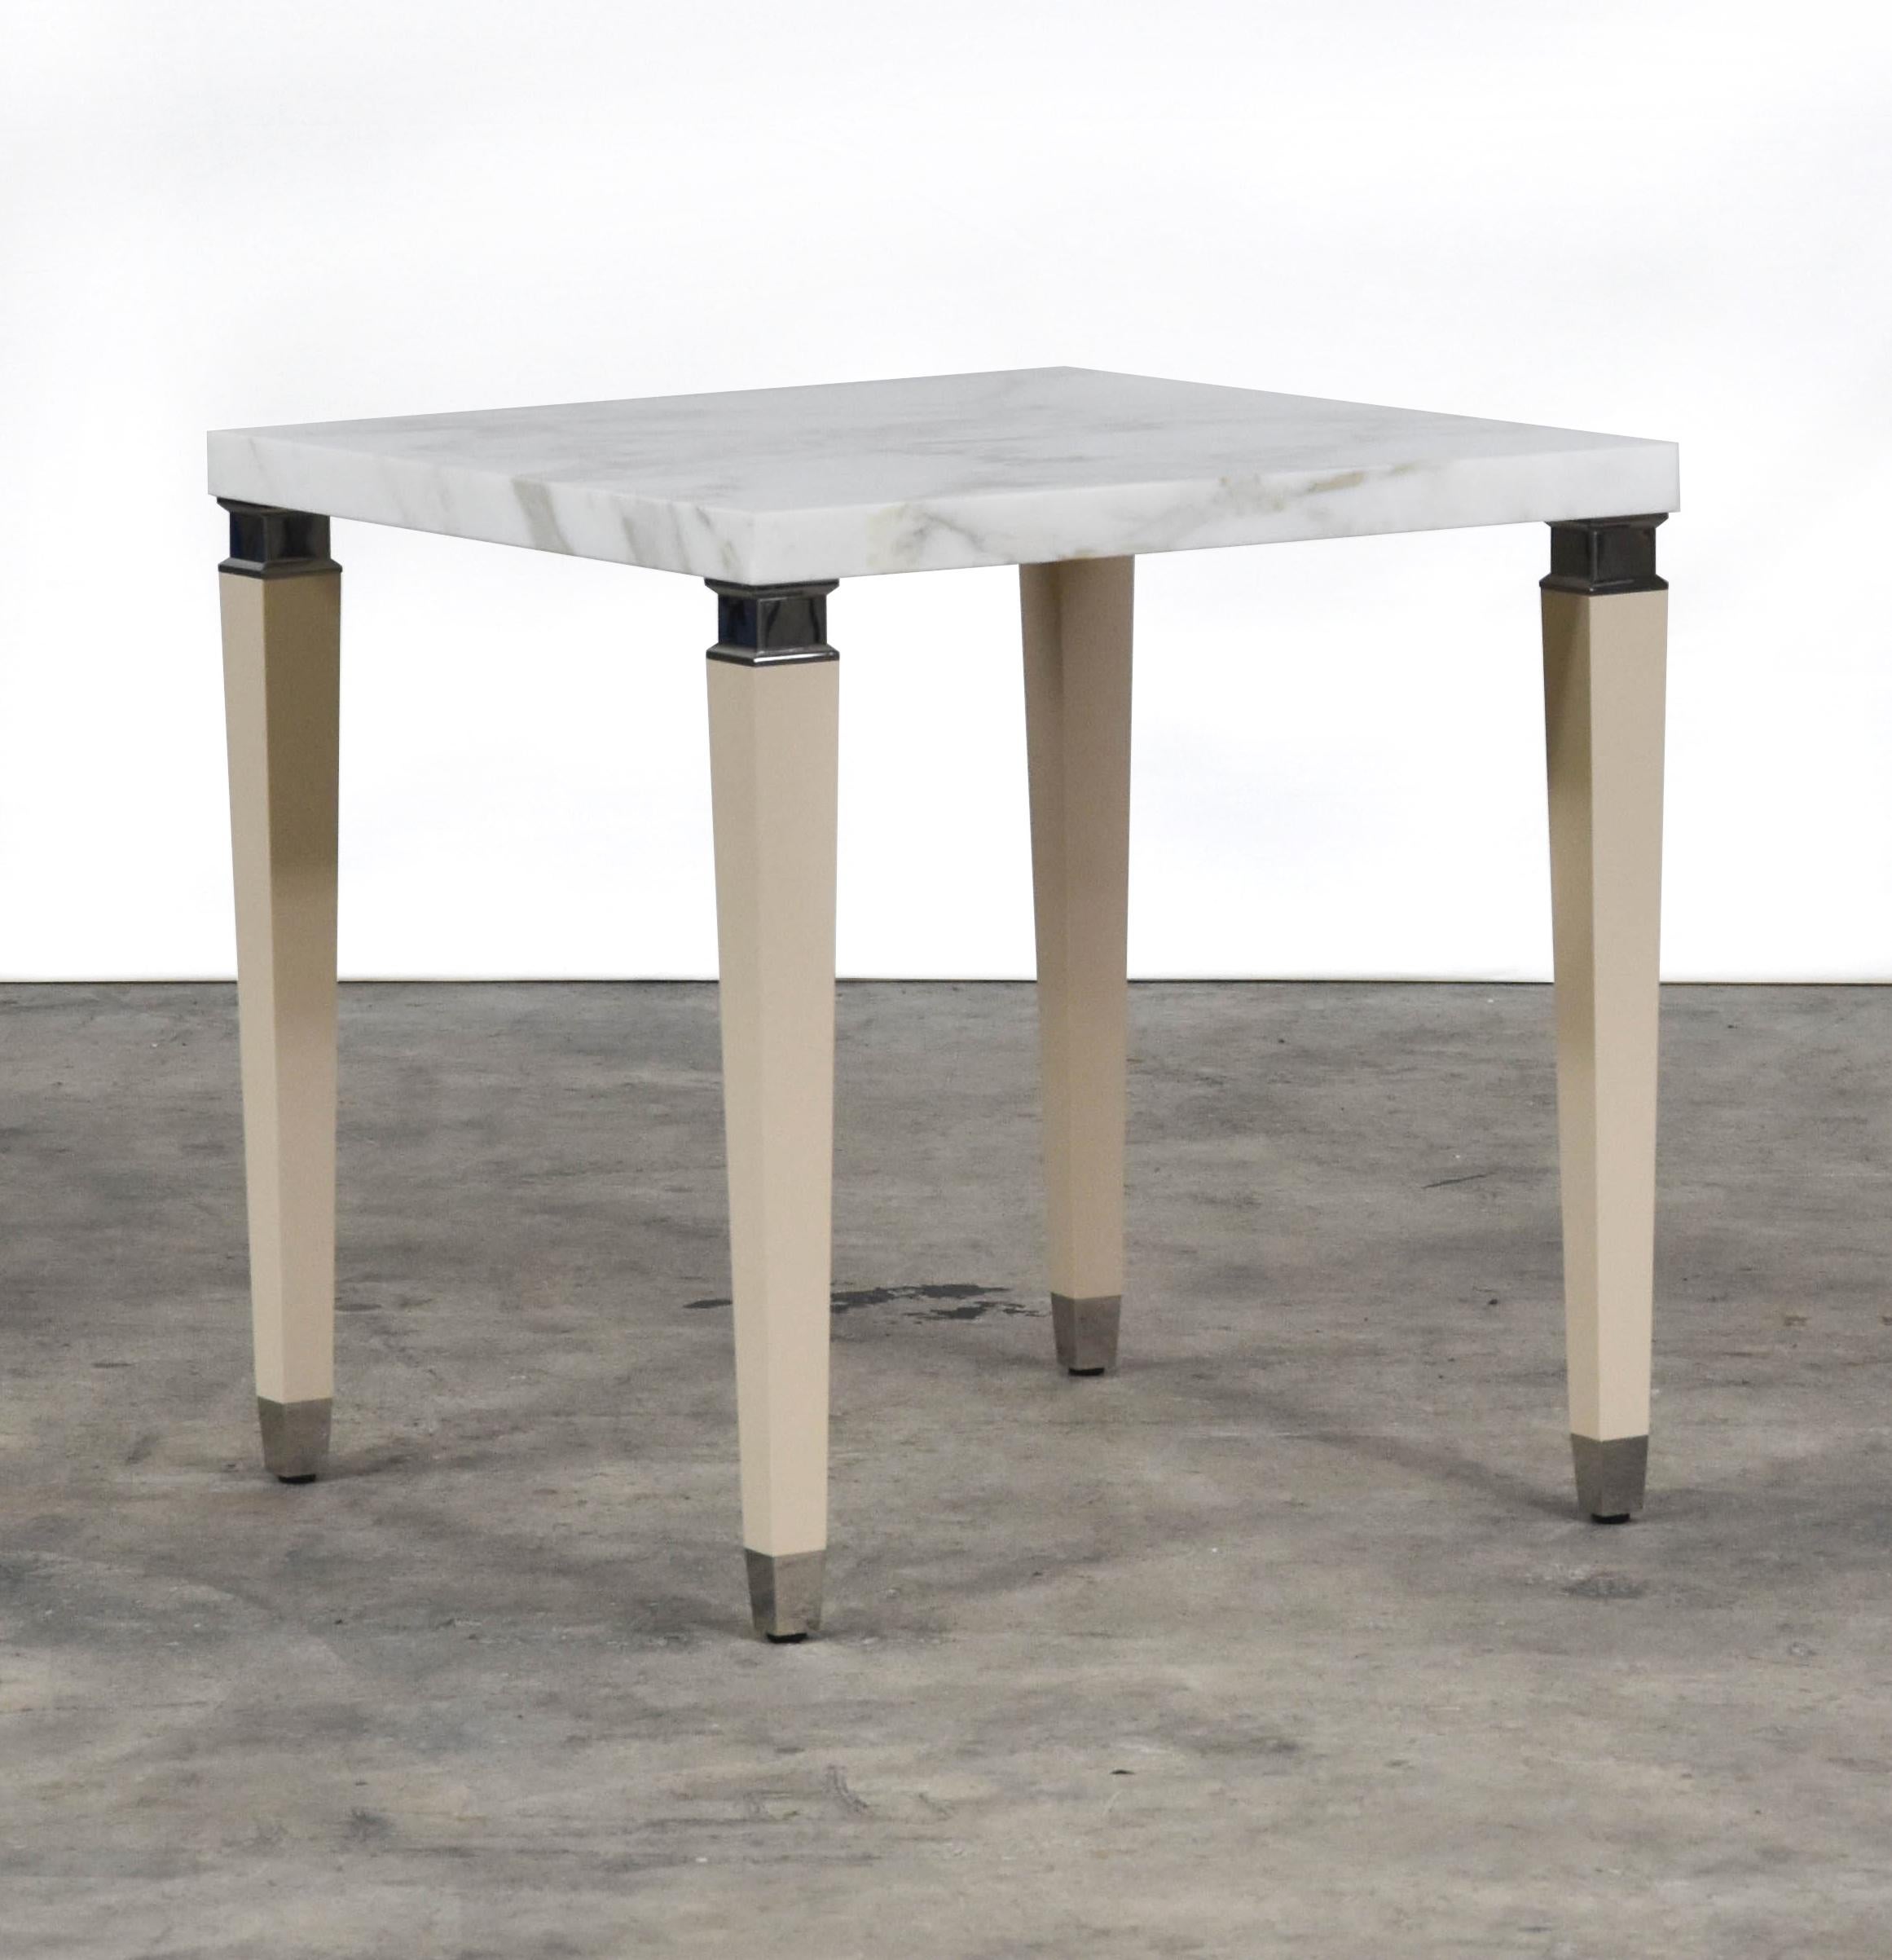 The nest coffee table features calacatta marble top, sand colored leather legs with steel accents.
  